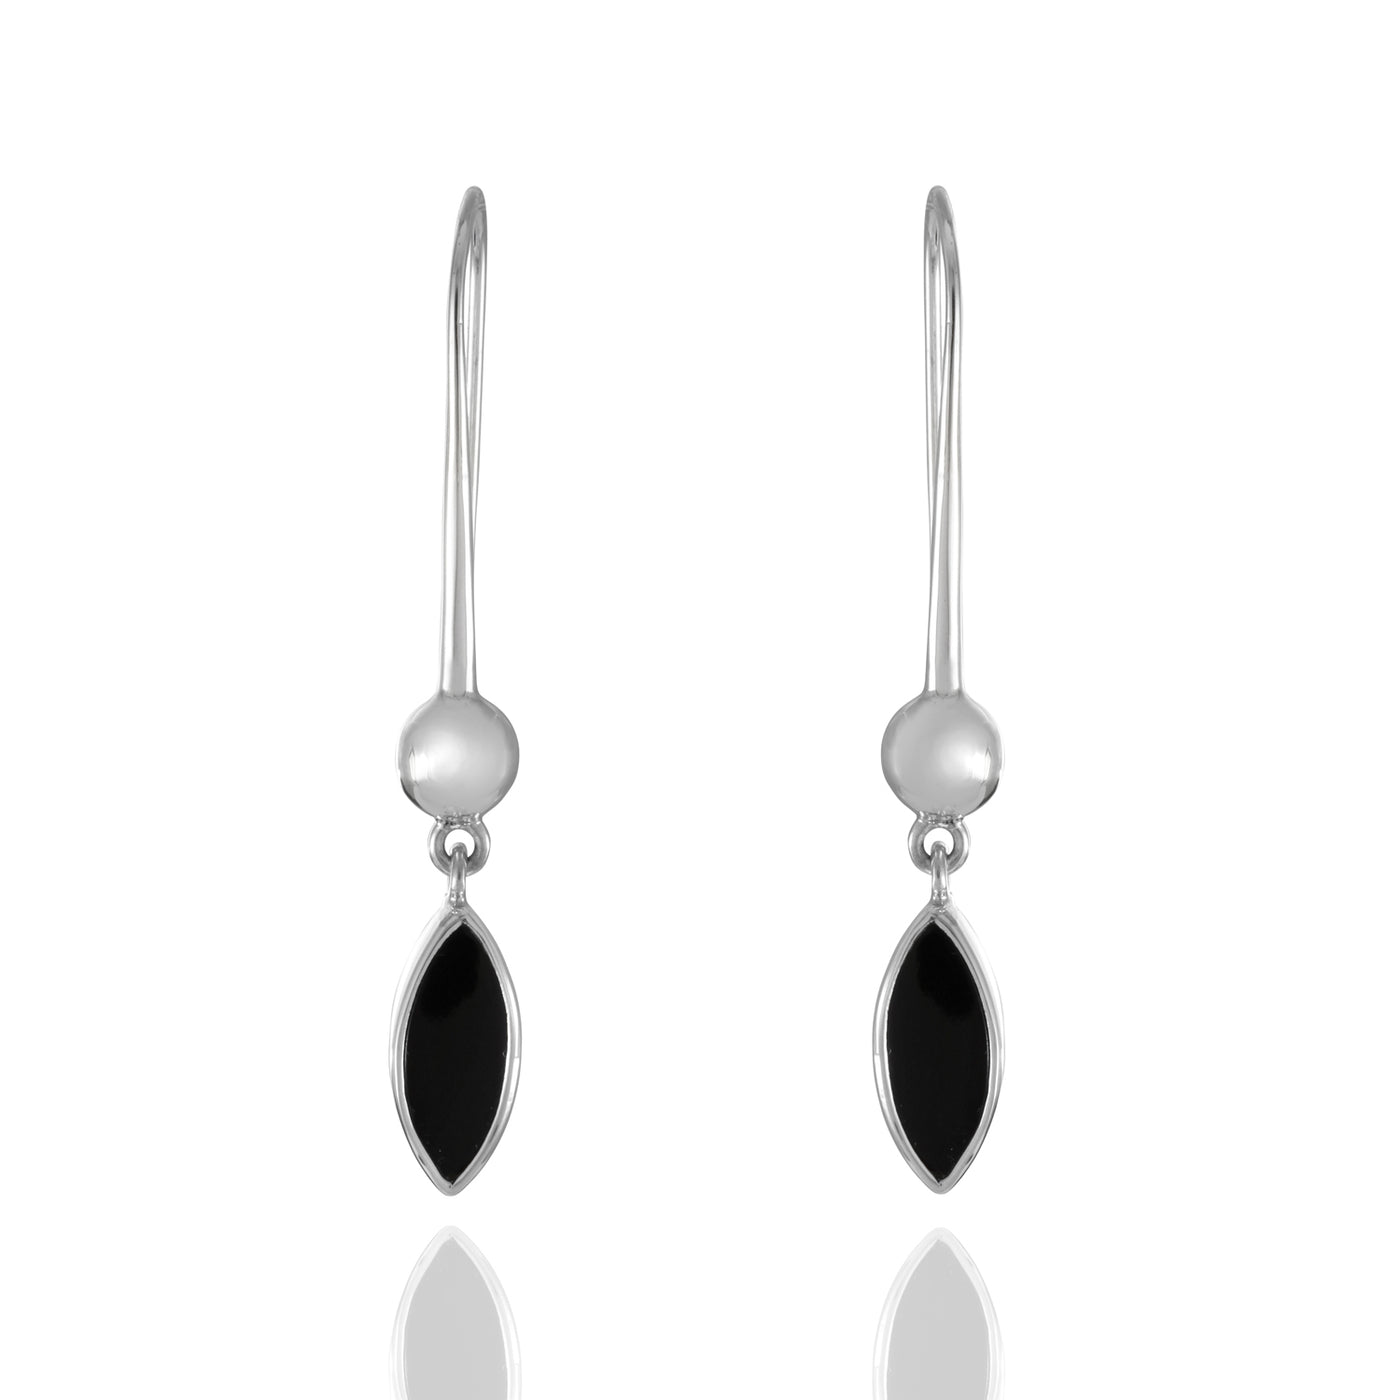 Silver Layer Drop Earring for Women | FashionCrab.com